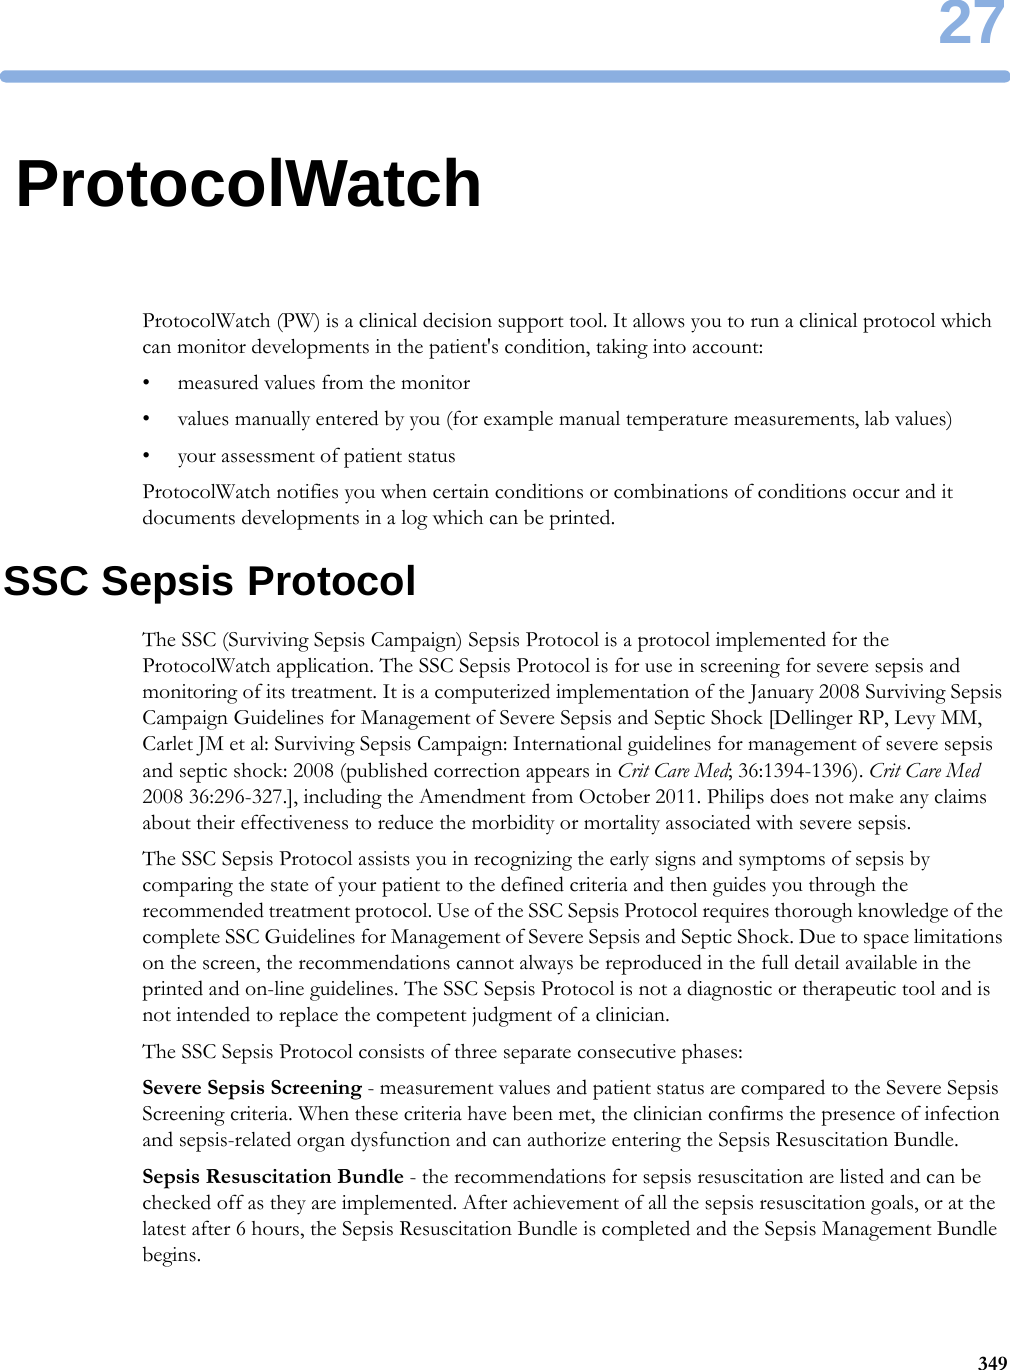 2734927ProtocolWatchProtocolWatch (PW) is a clinical decision support tool. It allows you to run a clinical protocol which can monitor developments in the patient&apos;s condition, taking into account:• measured values from the monitor• values manually entered by you (for example manual temperature measurements, lab values)• your assessment of patient statusProtocolWatch notifies you when certain conditions or combinations of conditions occur and it documents developments in a log which can be printed.SSC Sepsis ProtocolThe SSC (Surviving Sepsis Campaign) Sepsis Protocol is a protocol implemented for the ProtocolWatch application. The SSC Sepsis Protocol is for use in screening for severe sepsis and monitoring of its treatment. It is a computerized implementation of the January 2008 Surviving Sepsis Campaign Guidelines for Management of Severe Sepsis and Septic Shock [Dellinger RP, Levy MM, Carlet JM et al: Surviving Sepsis Campaign: International guidelines for management of severe sepsis and septic shock: 2008 (published correction appears in Crit Care Med; 36:1394-1396). Crit Care Med 2008 36:296-327.], including the Amendment from October 2011. Philips does not make any claims about their effectiveness to reduce the morbidity or mortality associated with severe sepsis.The SSC Sepsis Protocol assists you in recognizing the early signs and symptoms of sepsis by comparing the state of your patient to the defined criteria and then guides you through the recommended treatment protocol. Use of the SSC Sepsis Protocol requires thorough knowledge of the complete SSC Guidelines for Management of Severe Sepsis and Septic Shock. Due to space limitations on the screen, the recommendations cannot always be reproduced in the full detail available in the printed and on-line guidelines. The SSC Sepsis Protocol is not a diagnostic or therapeutic tool and is not intended to replace the competent judgment of a clinician.The SSC Sepsis Protocol consists of three separate consecutive phases:Severe Sepsis Screening - measurement values and patient status are compared to the Severe Sepsis Screening criteria. When these criteria have been met, the clinician confirms the presence of infection and sepsis-related organ dysfunction and can authorize entering the Sepsis Resuscitation Bundle.Sepsis Resuscitation Bundle - the recommendations for sepsis resuscitation are listed and can be checked off as they are implemented. After achievement of all the sepsis resuscitation goals, or at the latest after 6 hours, the Sepsis Resuscitation Bundle is completed and the Sepsis Management Bundle begins.